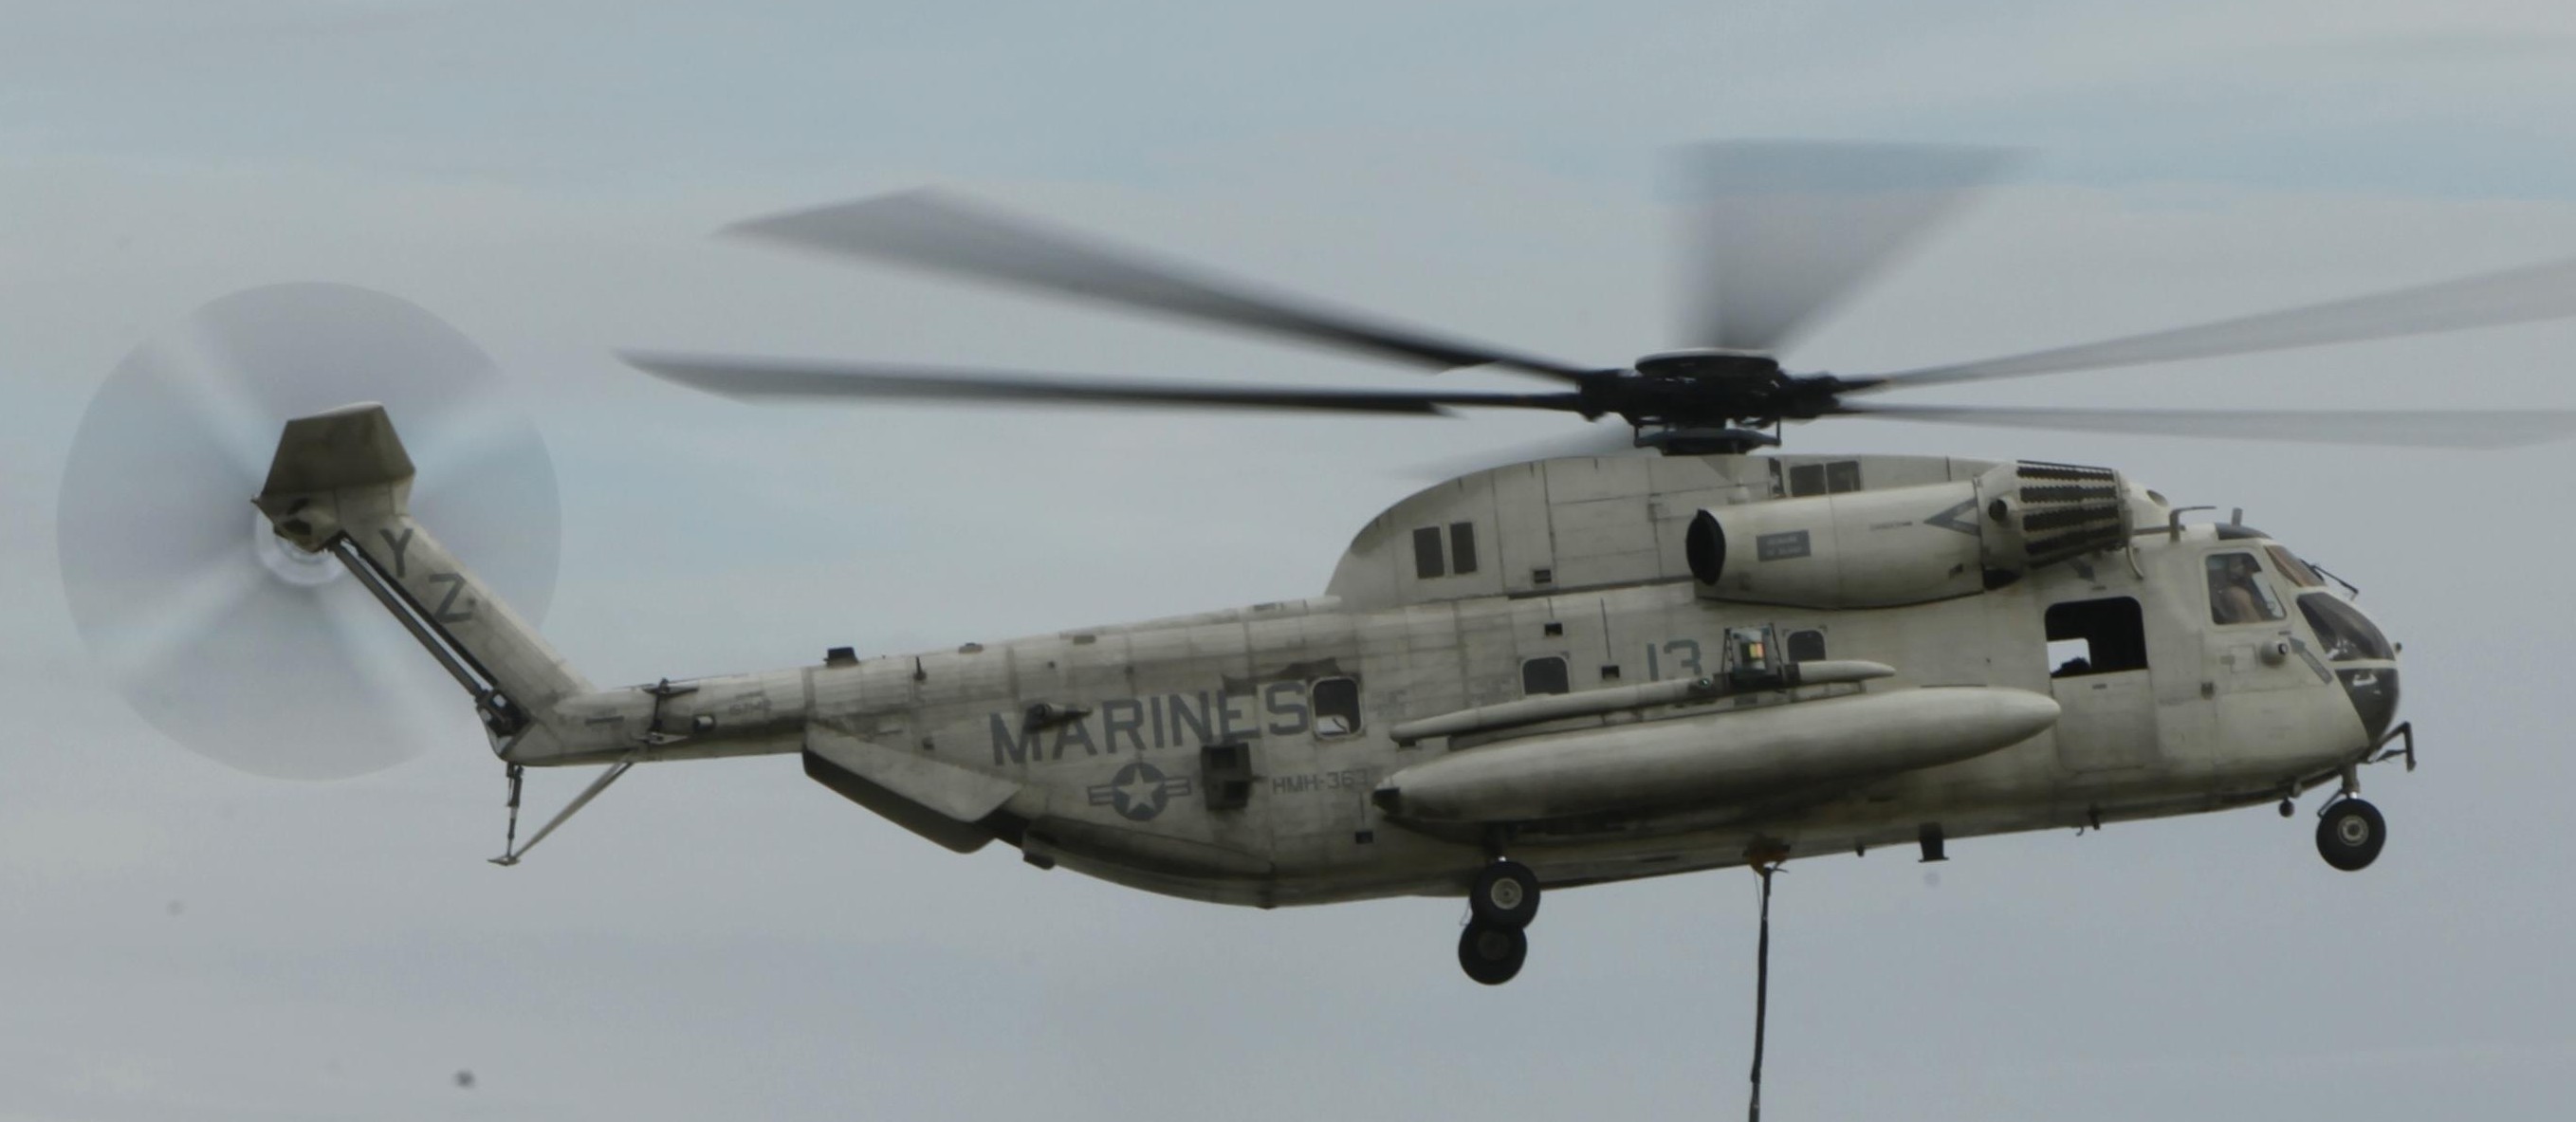 hmh-363 red lions marine heavy helicopter squadron usmc sikorsky ch-53d sea stallion mcb hawaii kaneohe bay 31